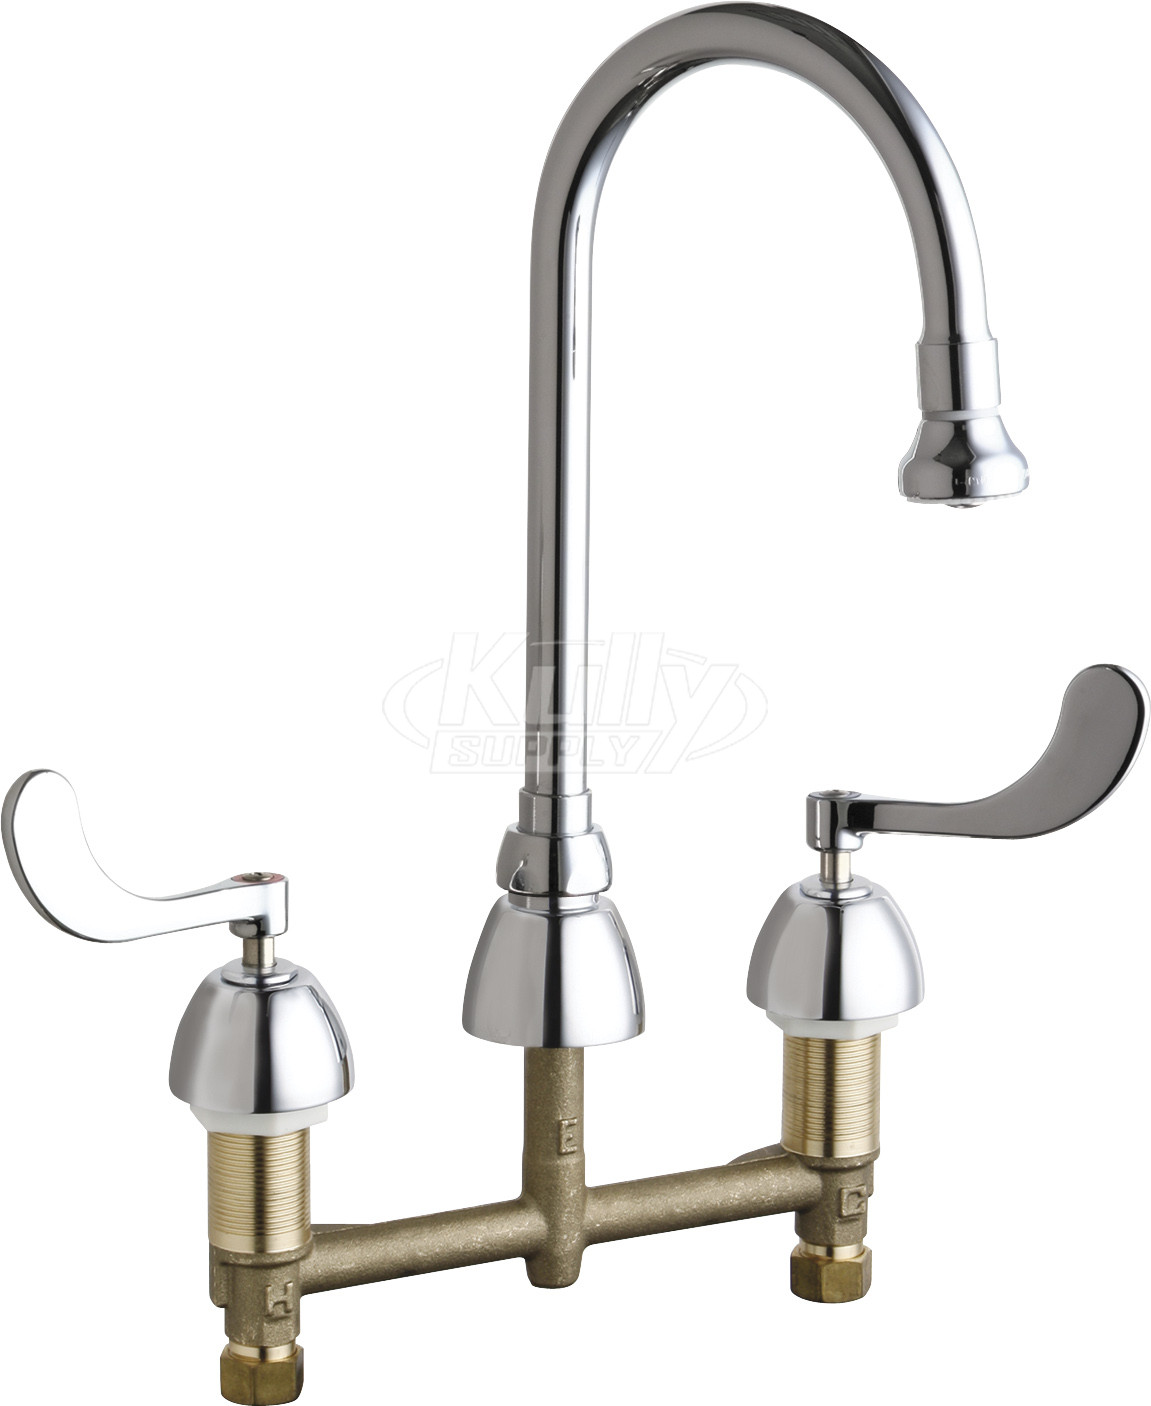 Chicago 786-ABCP Concealed Hot and Cold Water Sink Faucet